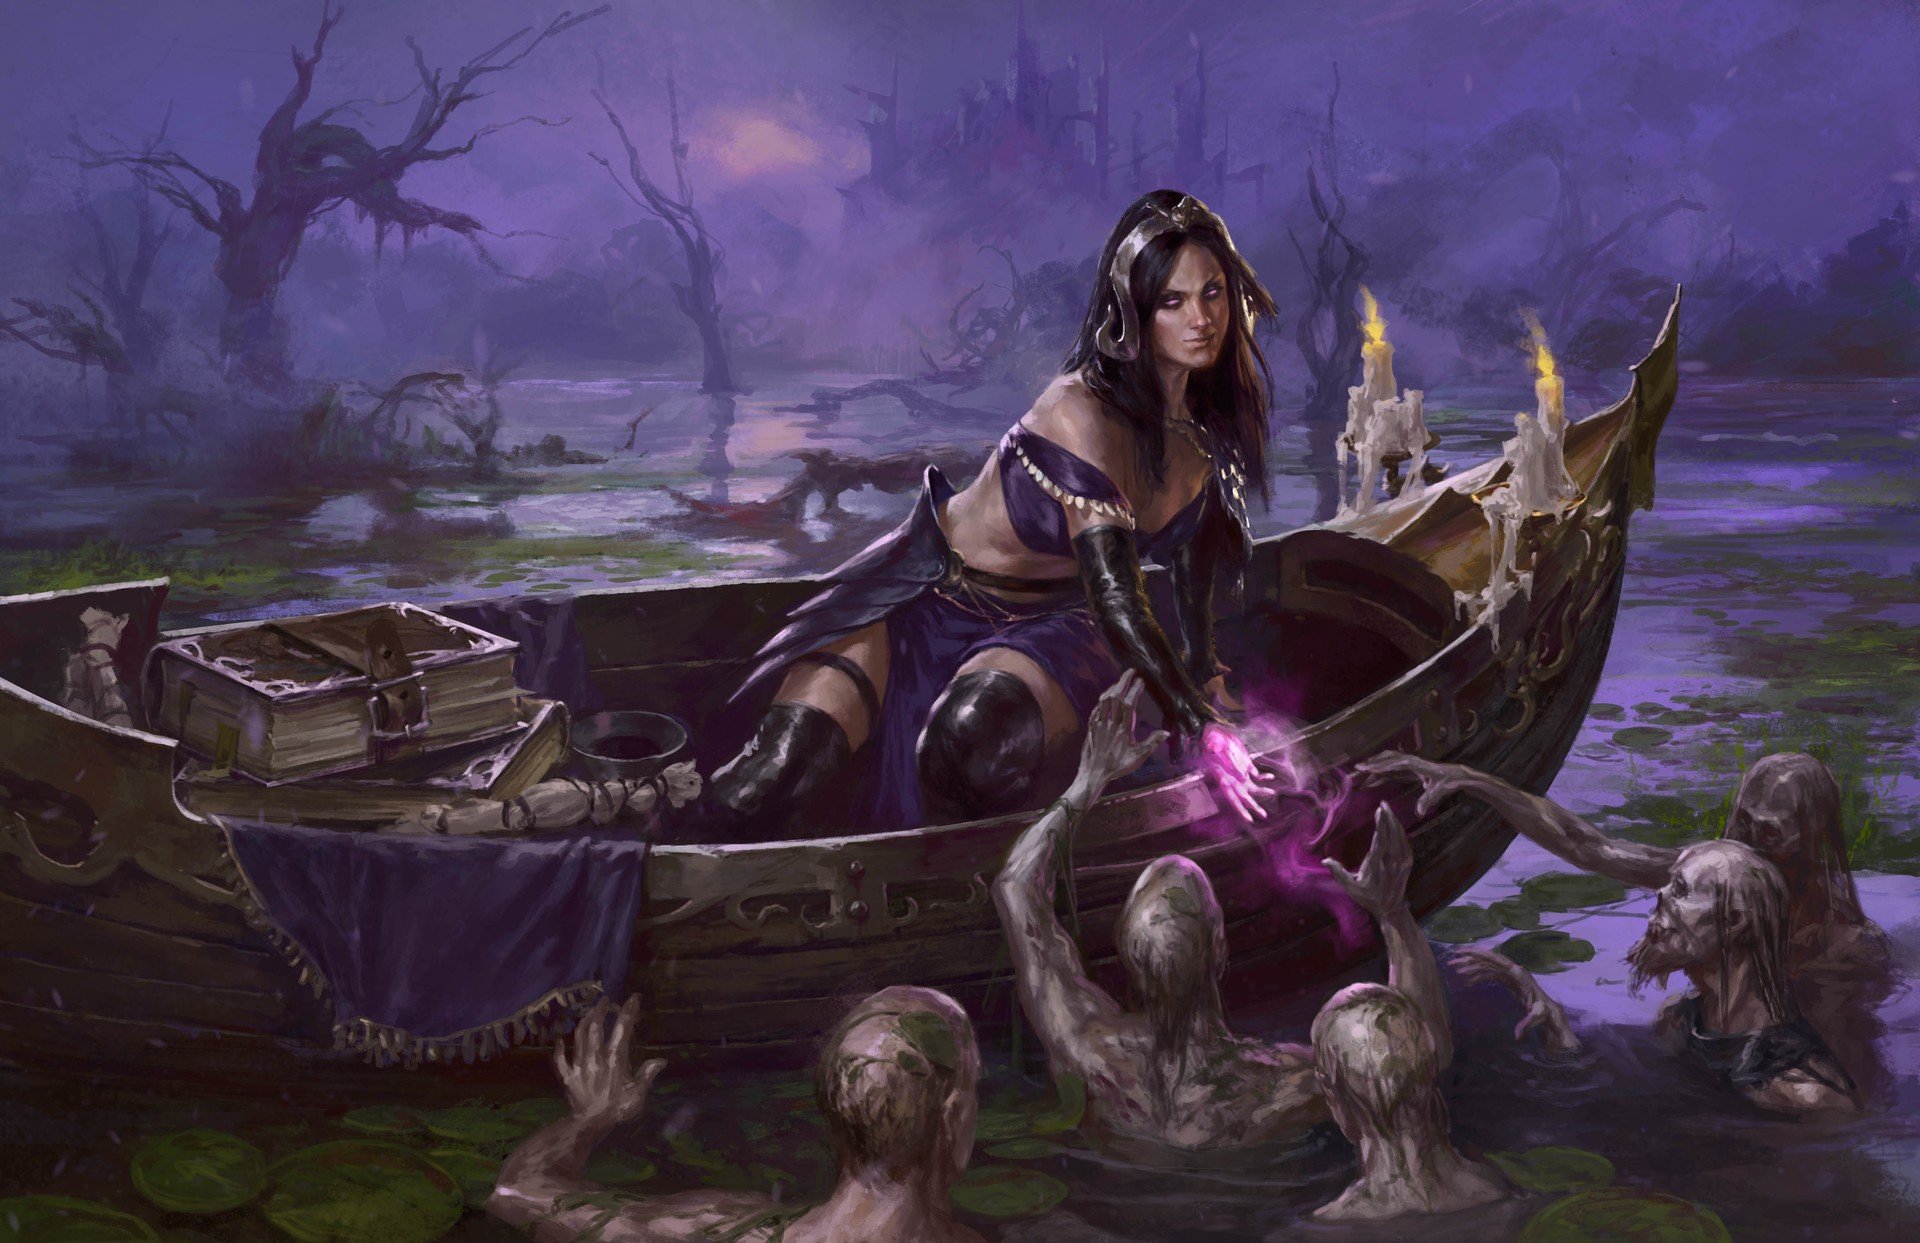 liliana wallpaper,cg artwork,action adventure game,adventure game,strategy video game,mythology